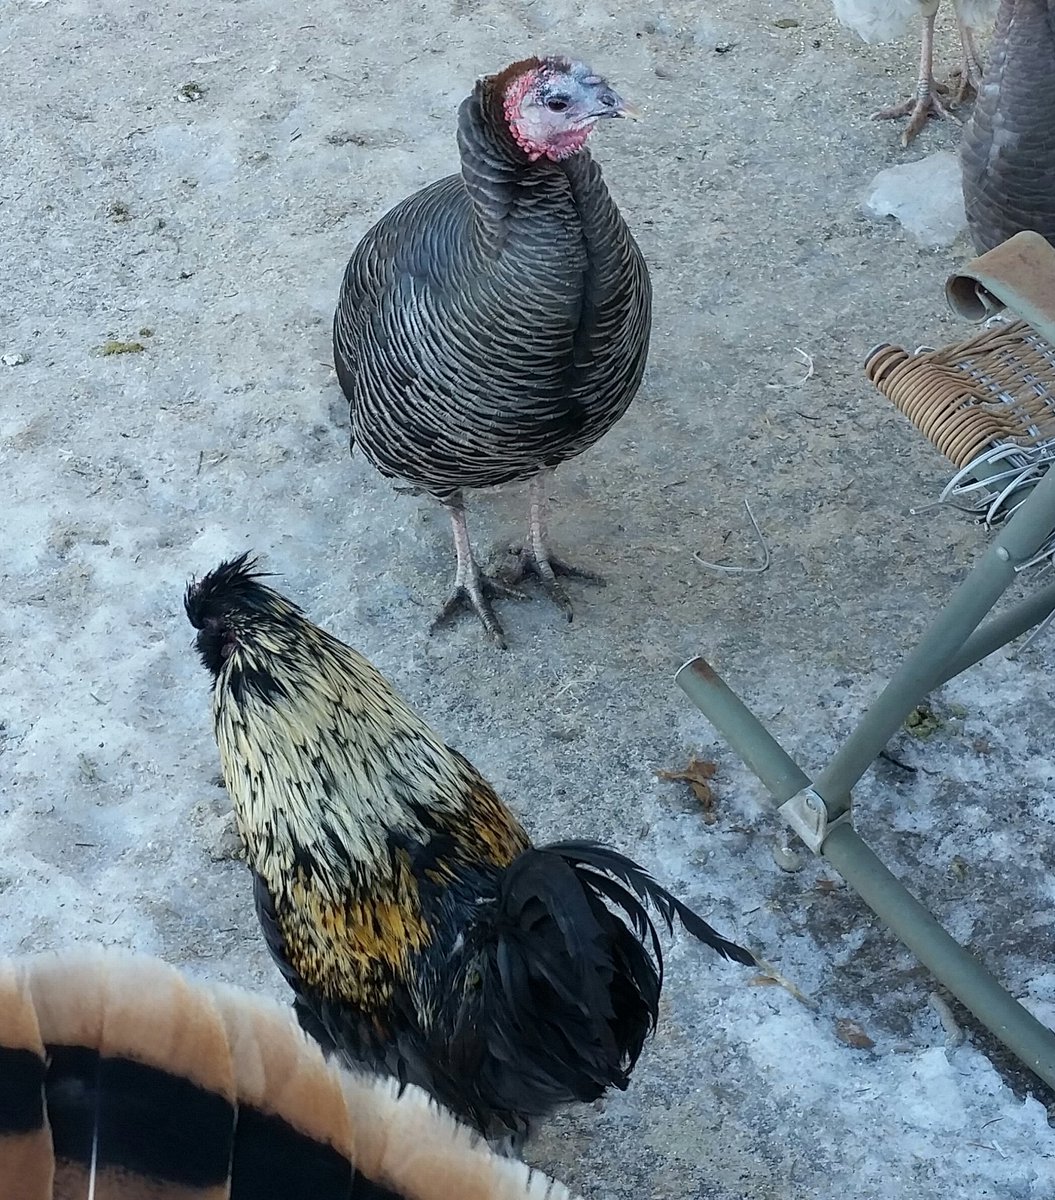 Napoleon and turkey girl have loved each other since they were tiny chicks. Neither of them has eyes for anyone else. Usually roosters have a harem, but not Napoleon. I've never seen him try to woo any other girl, and he sleeps cuddled under TG's wing in the coop each night.